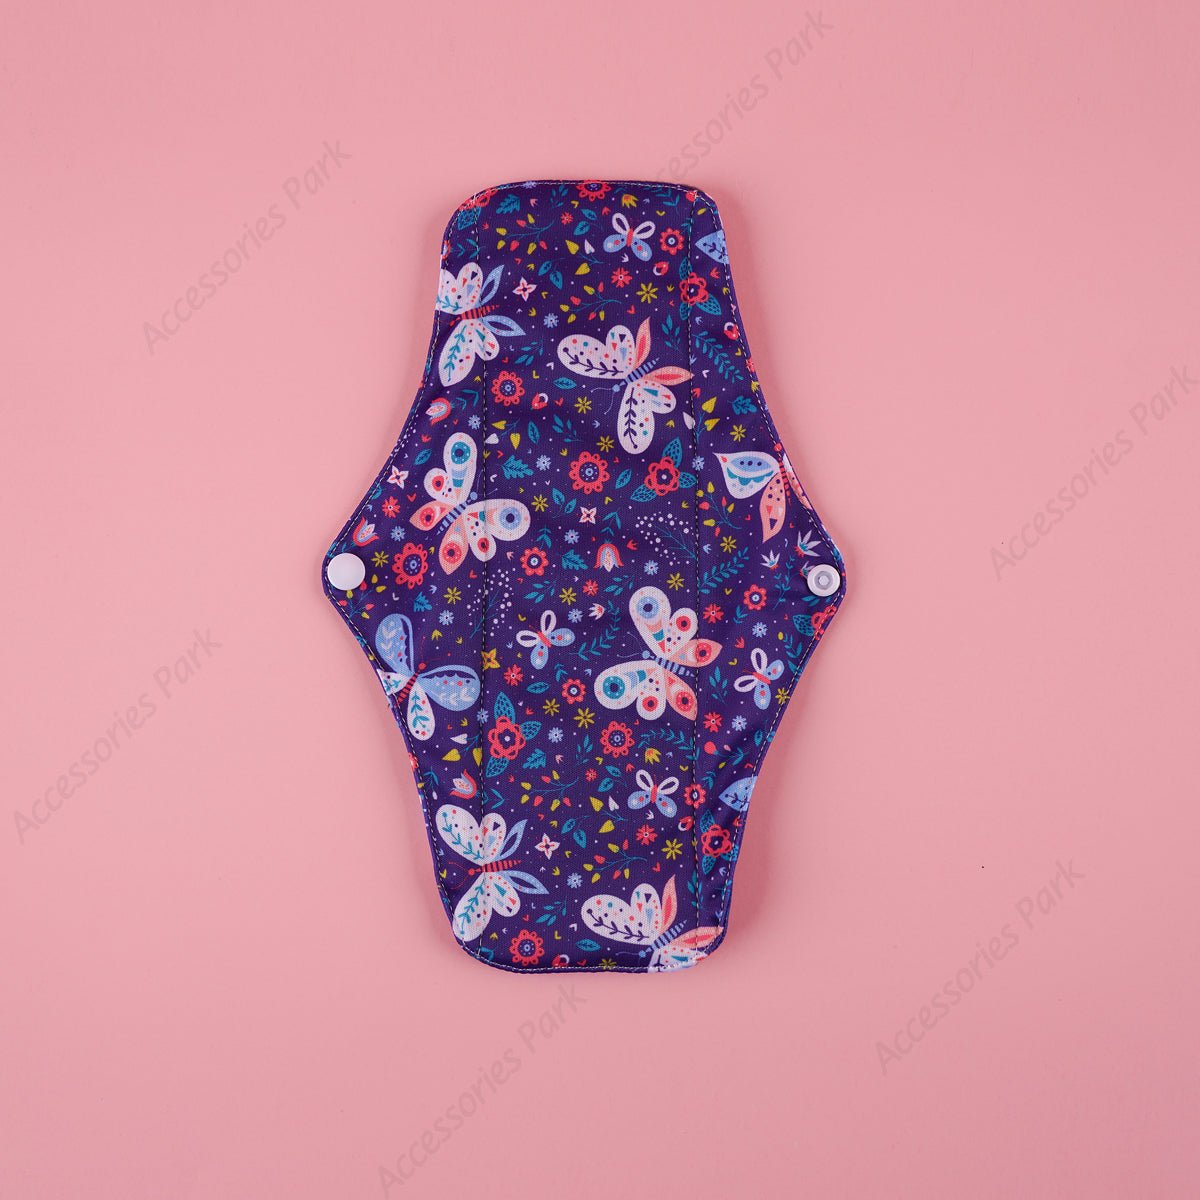 A menstrual reusable pad with floral design